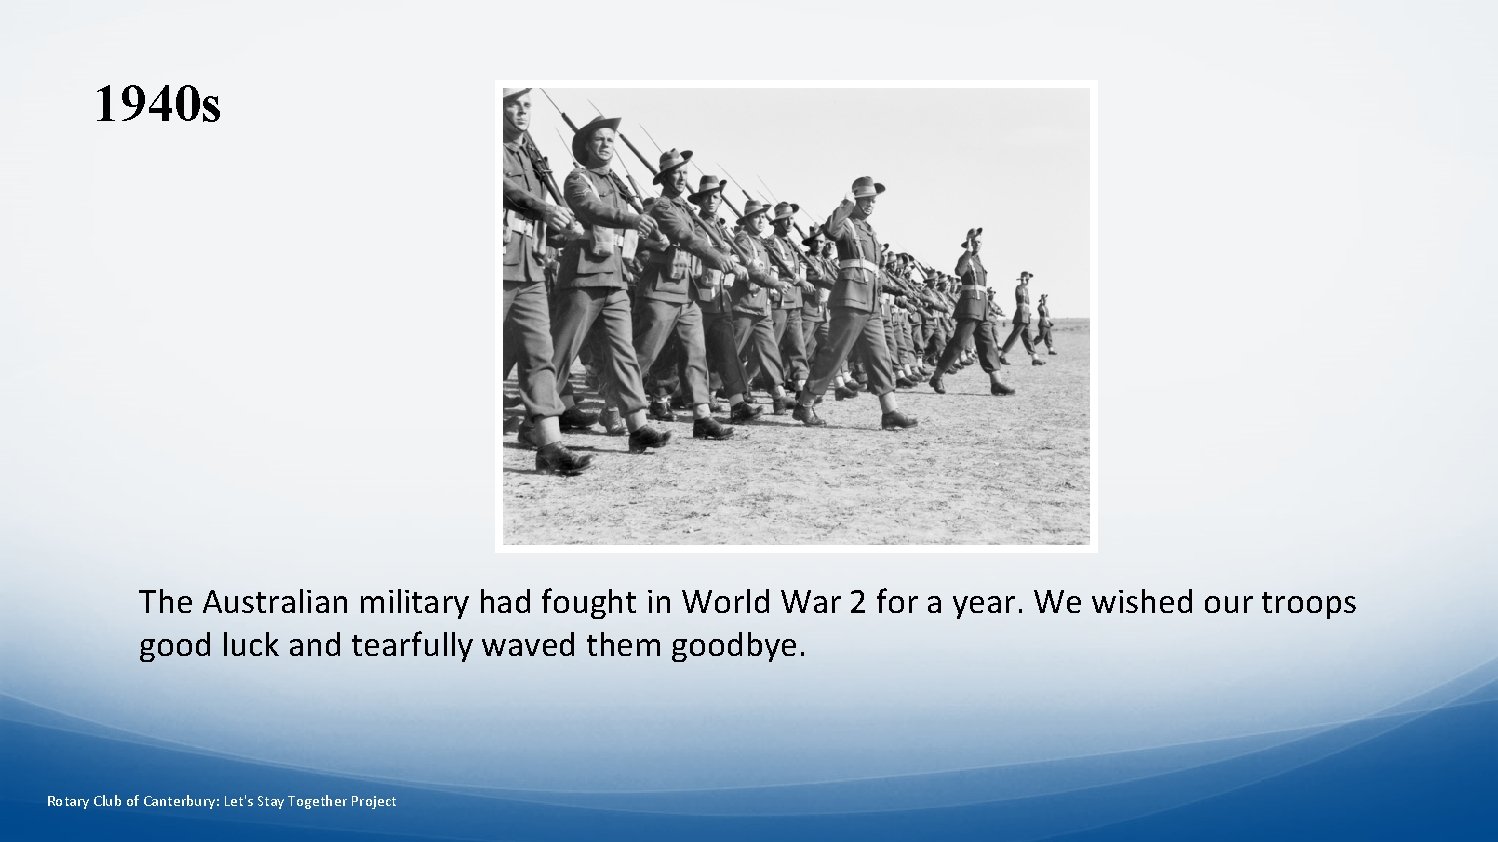 1940 s The Australian military had fought in World War 2 for a year.